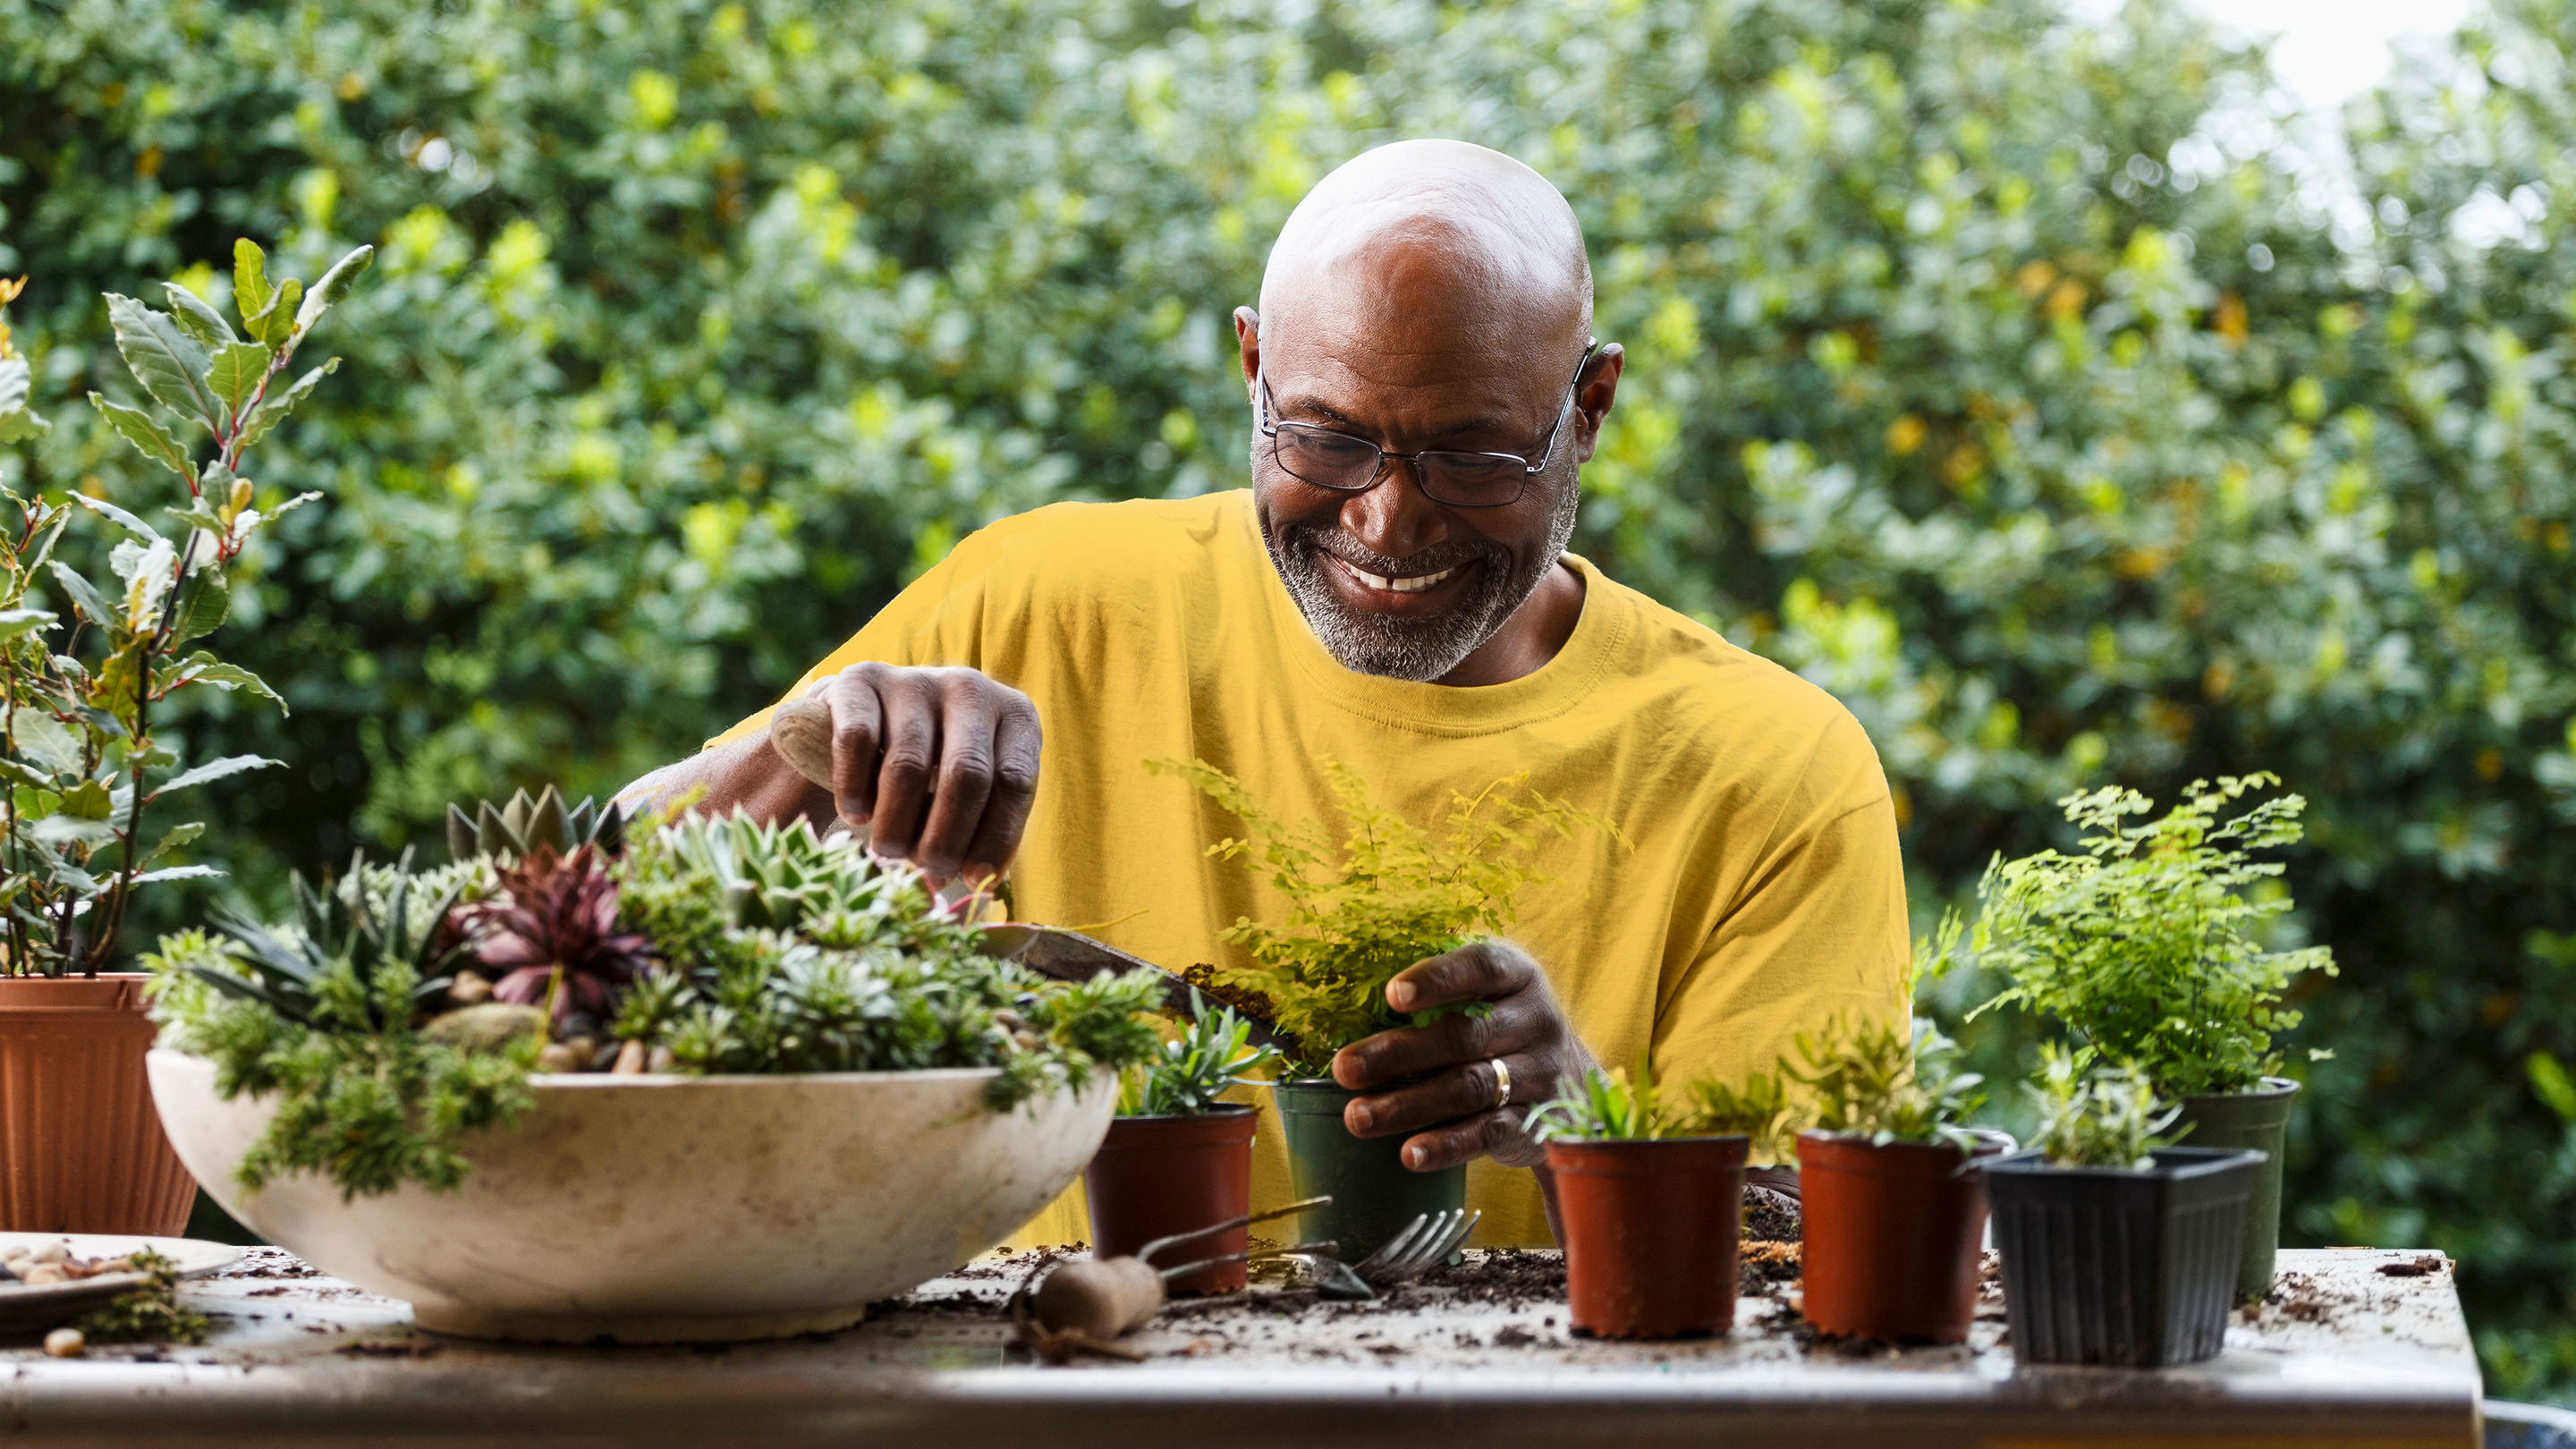 Man potting plants at table in garden